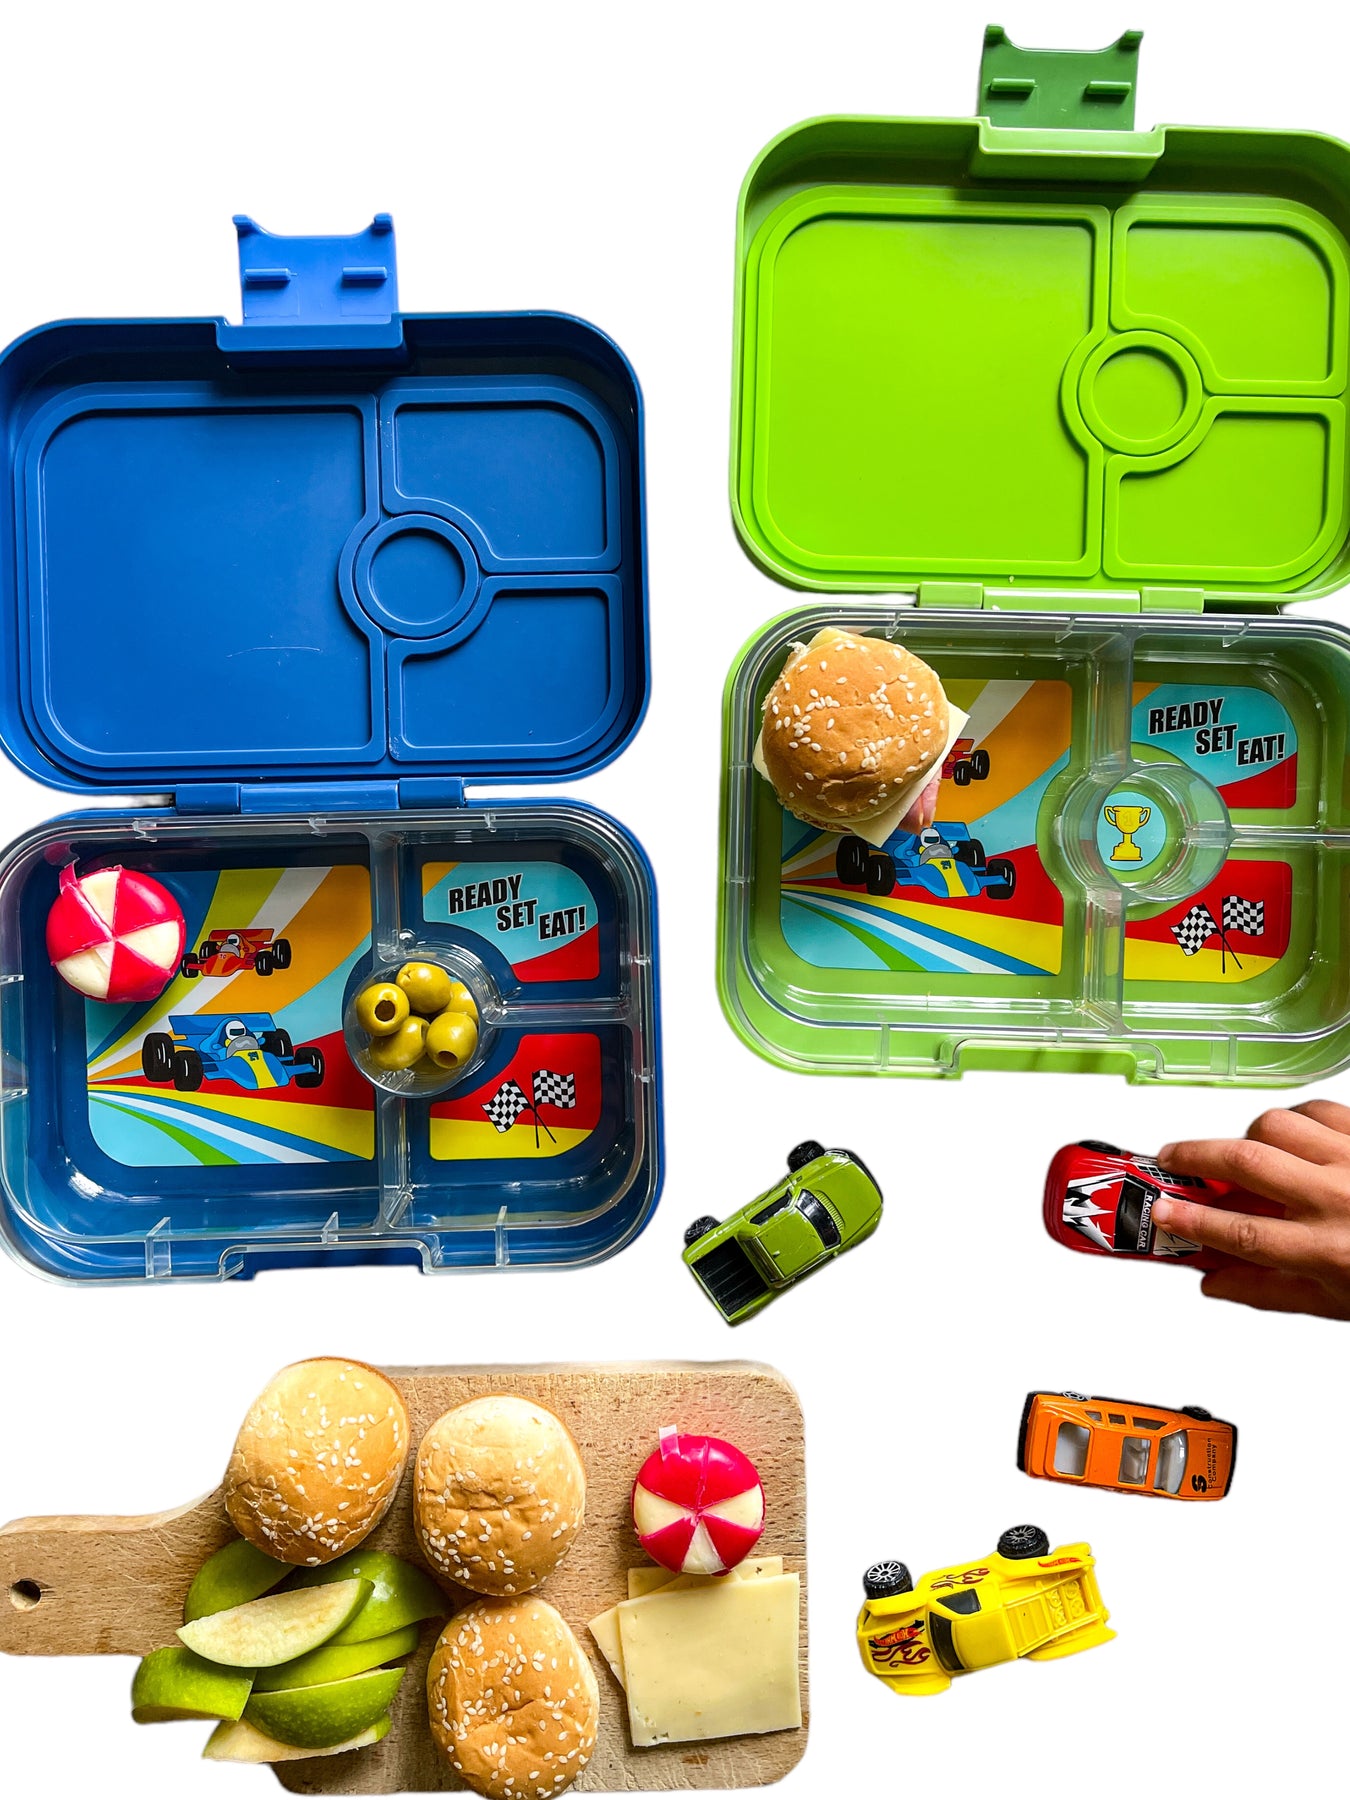 Introducing new yumbox panino! This is the new - Cool Car PictureZ